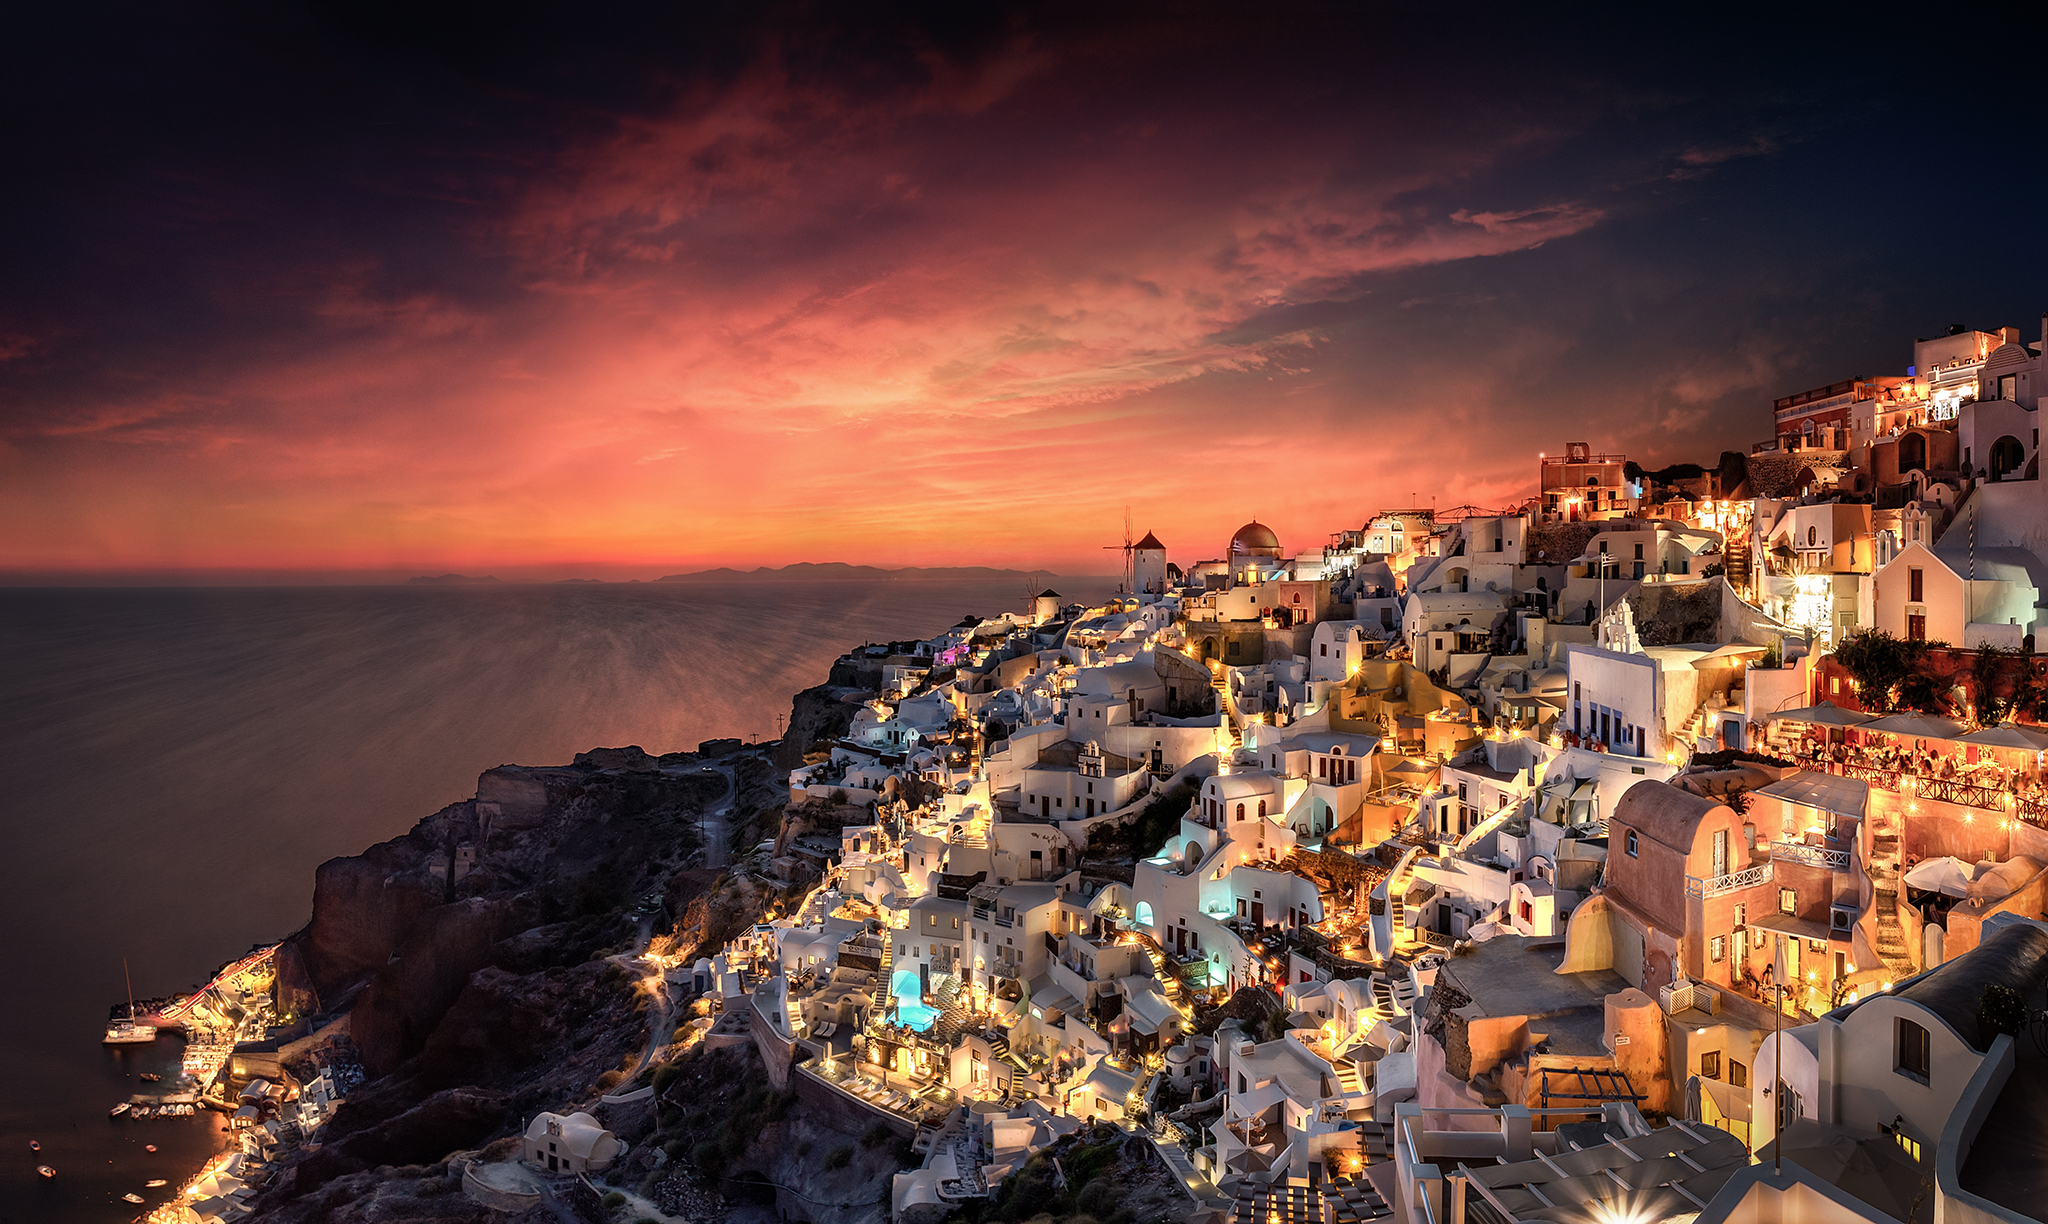 General 2048x1224 Greece house building architecture sunset water clouds sky night lights HDR cityscape outdoors photography Pawel Olejniczak urban windmill cliff Santorini